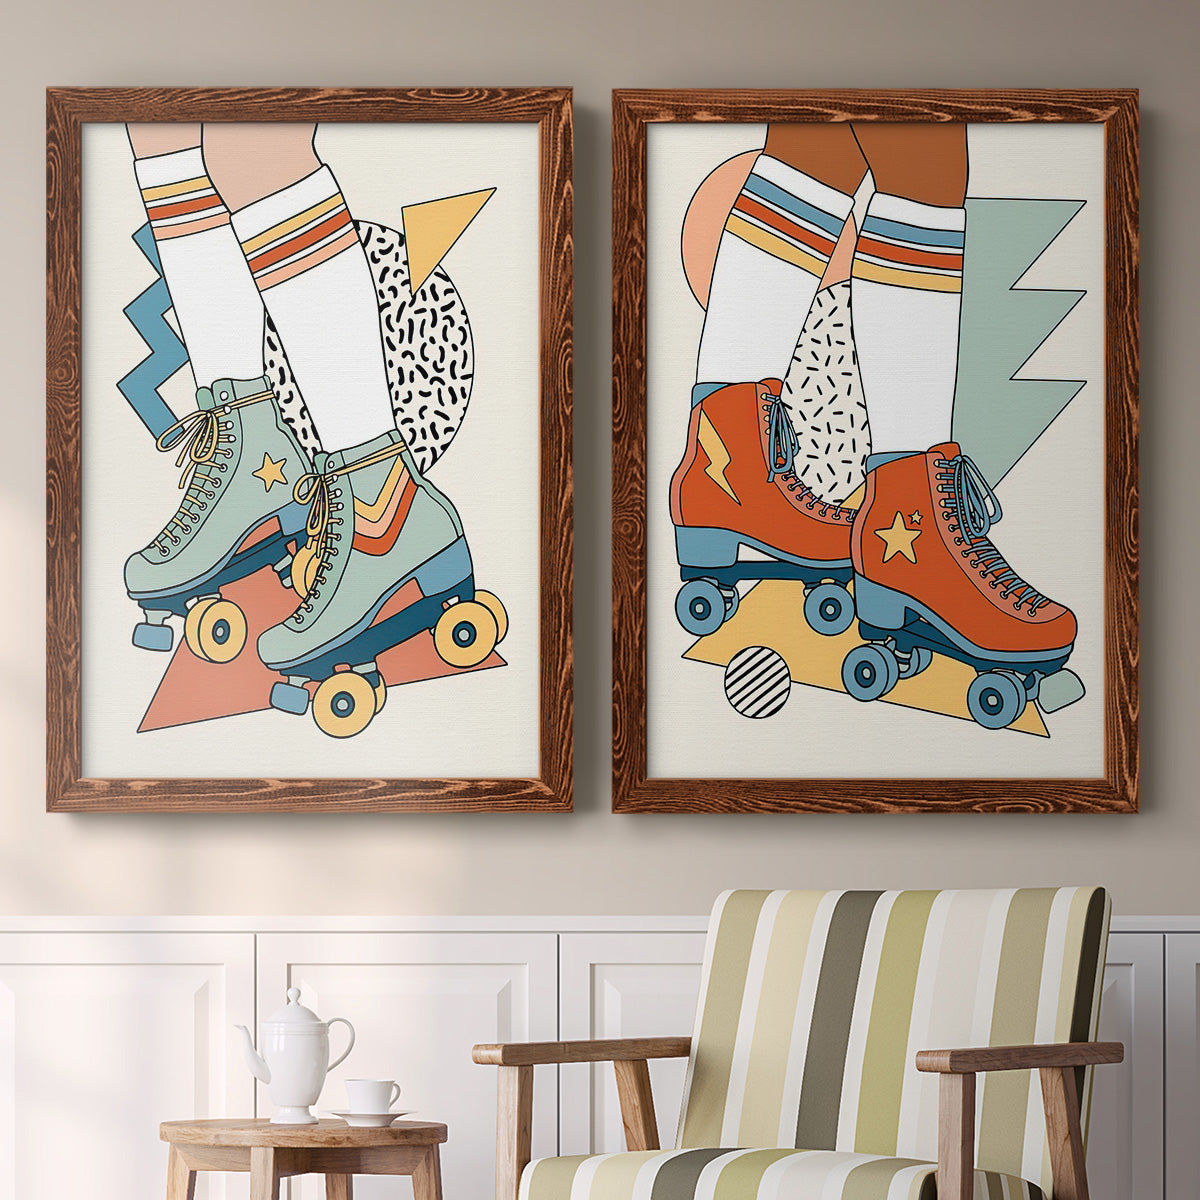 Let it Roll I - Premium Framed Canvas 2 Piece Set - Ready to Hang